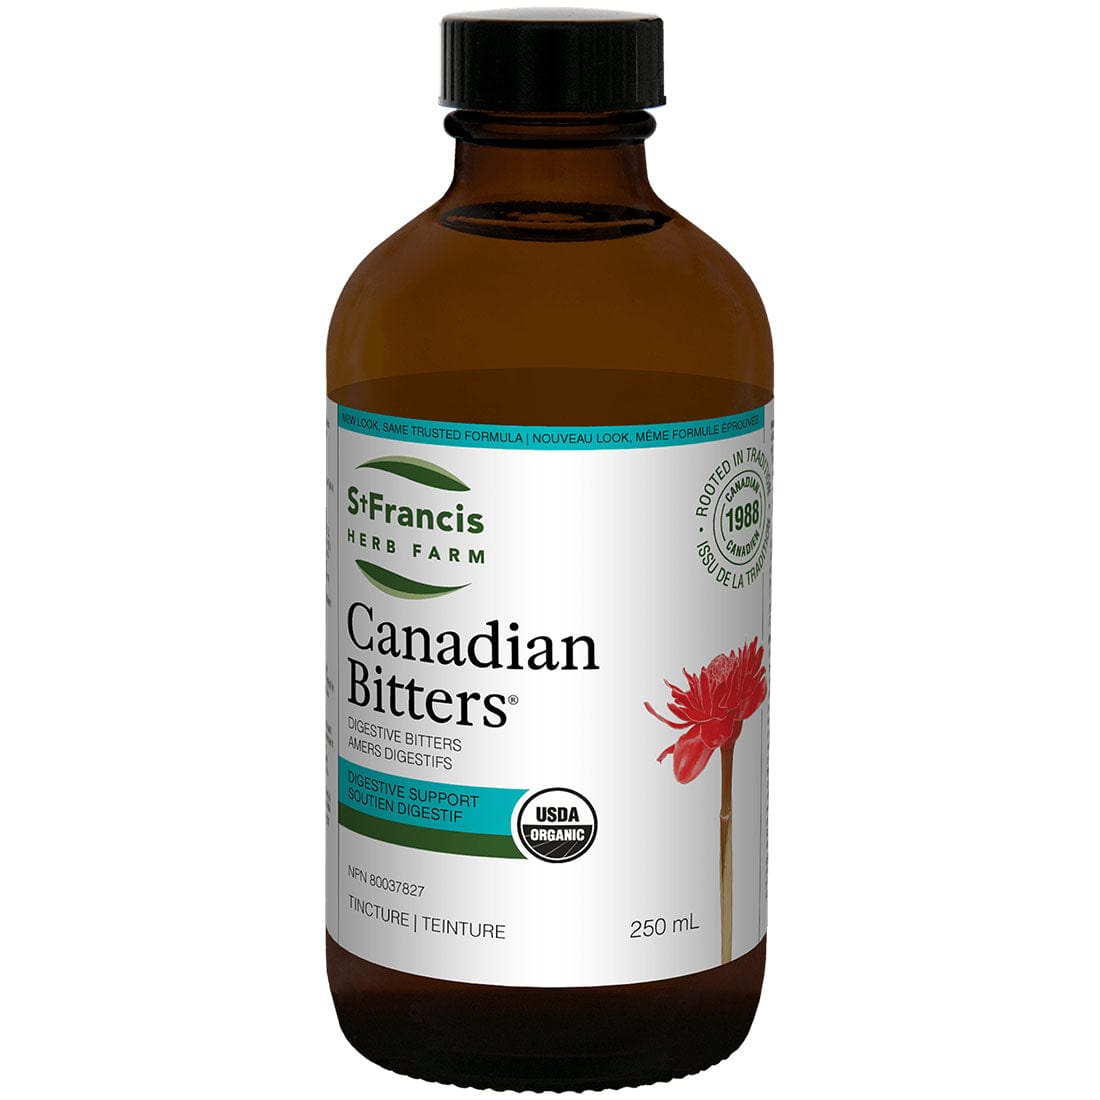 St. Francis Canadian Bitters, Digestive Bitters, Soothing relief of heartburn, indigestion, constipation, bloating, and gas